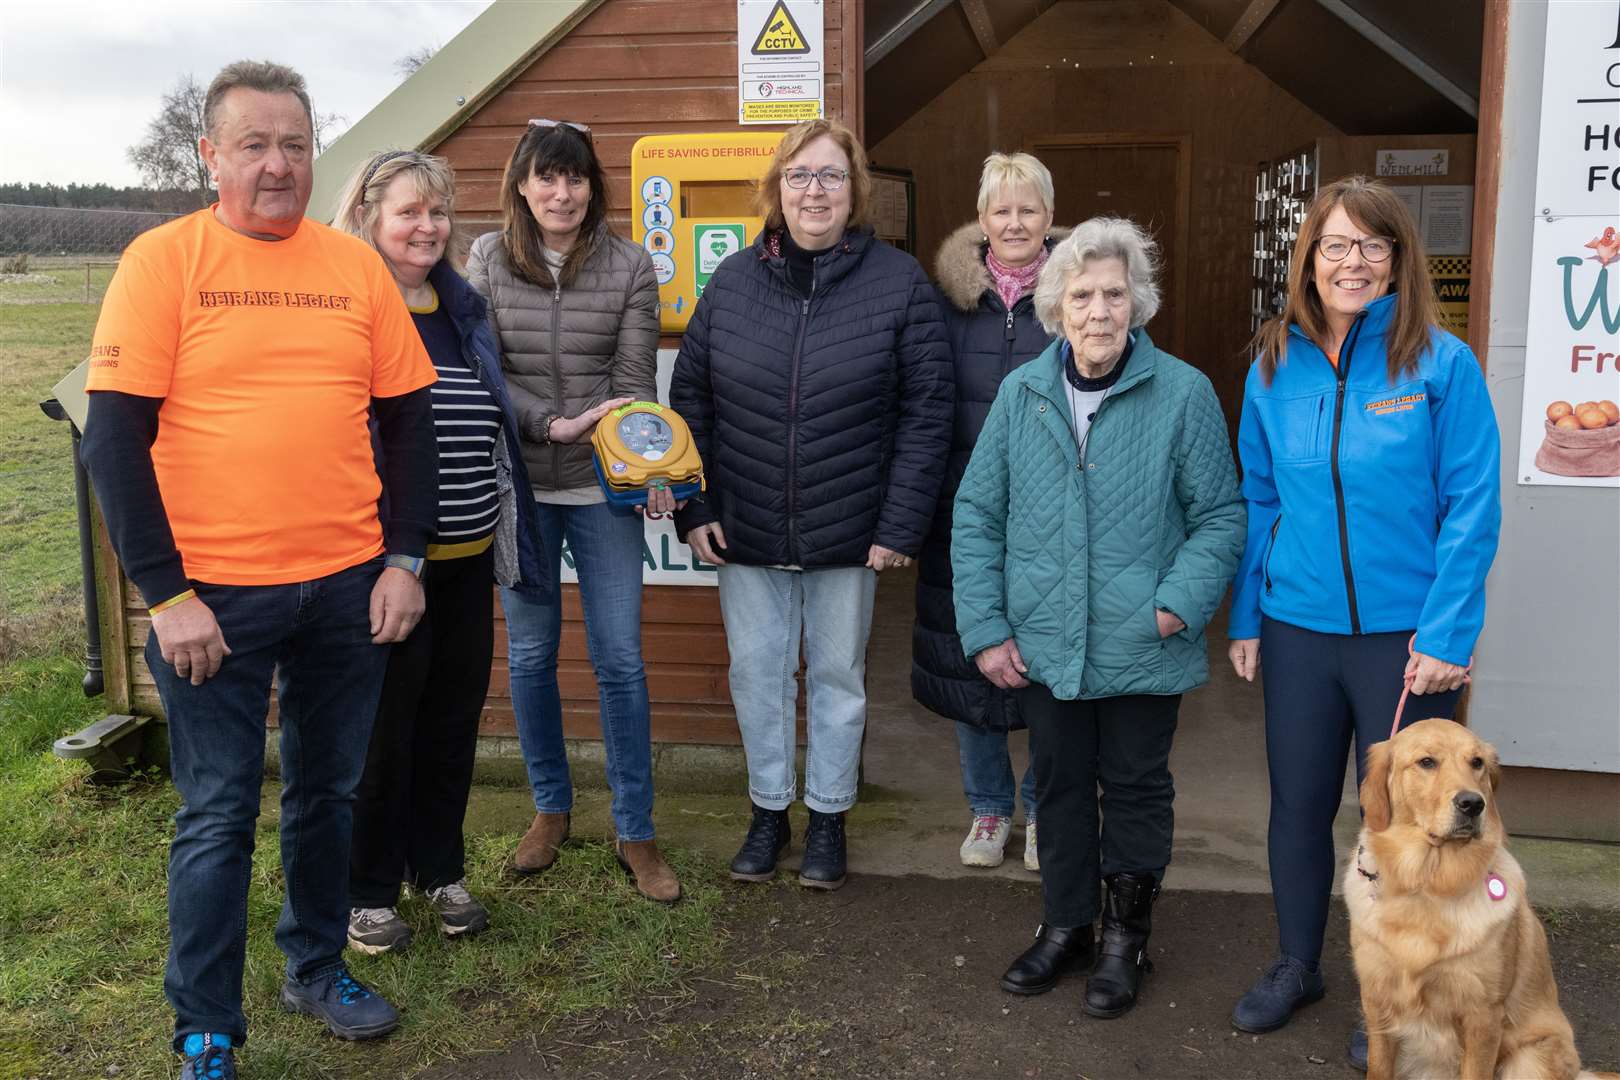 Gordon McKandie of Keiran's Legacy, Wellhill Farm owner Ilene Taylor and Dyke Landward Comunity Council members Jackie Davidson, Caroline Macleod, Sheena Tulloch and Wendy McLaren, and Sandra McKandie of Keiran's Legacy outside the Wellhill Farm Shop where they have installed a defibrillator. Picture: Beth Taylor